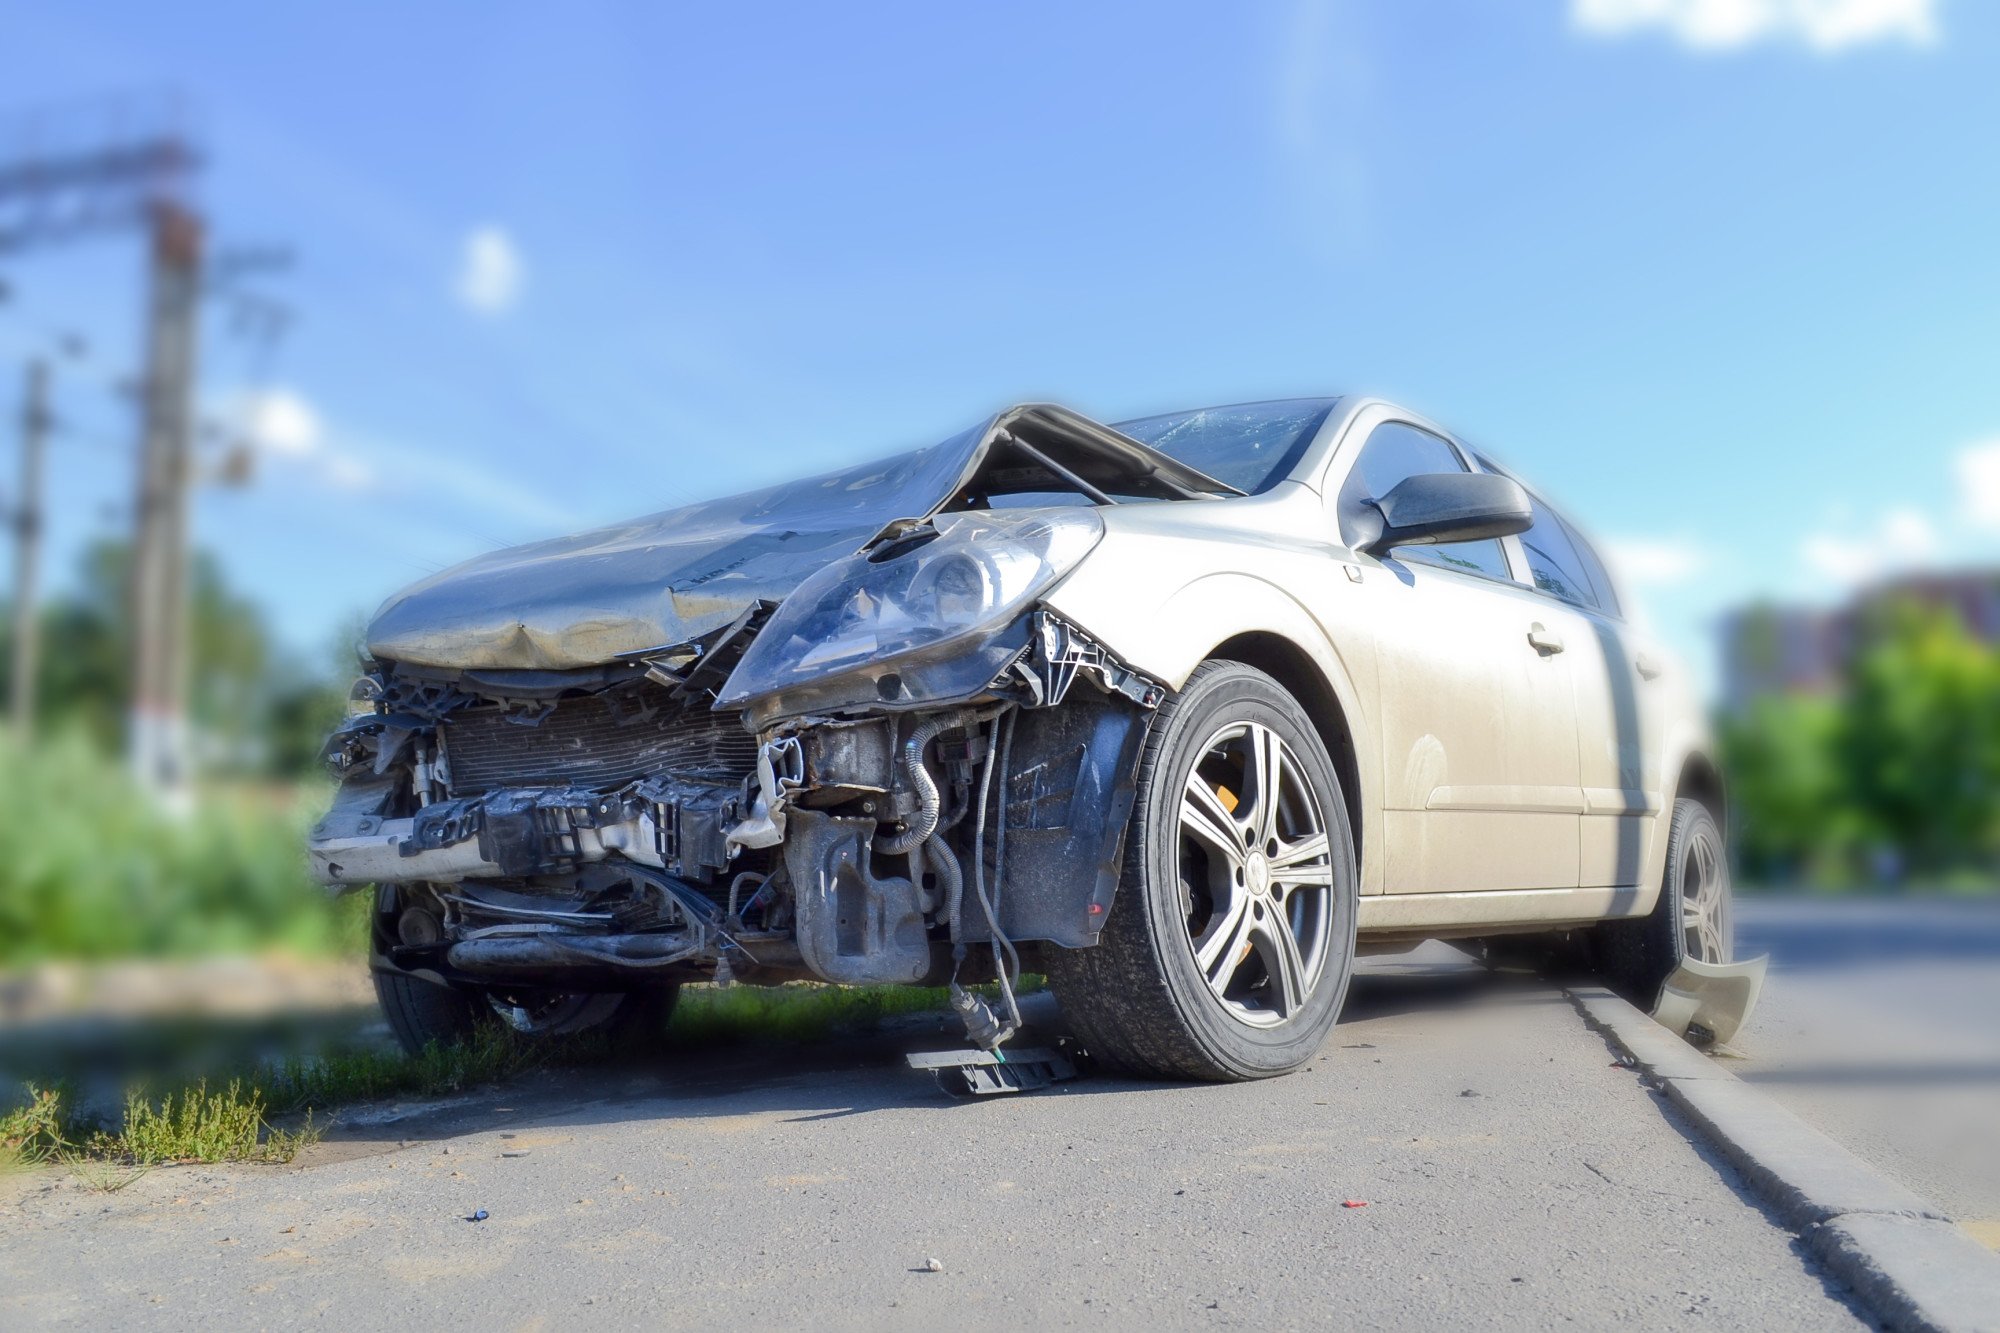 How Do You Sell a Totaled Car?